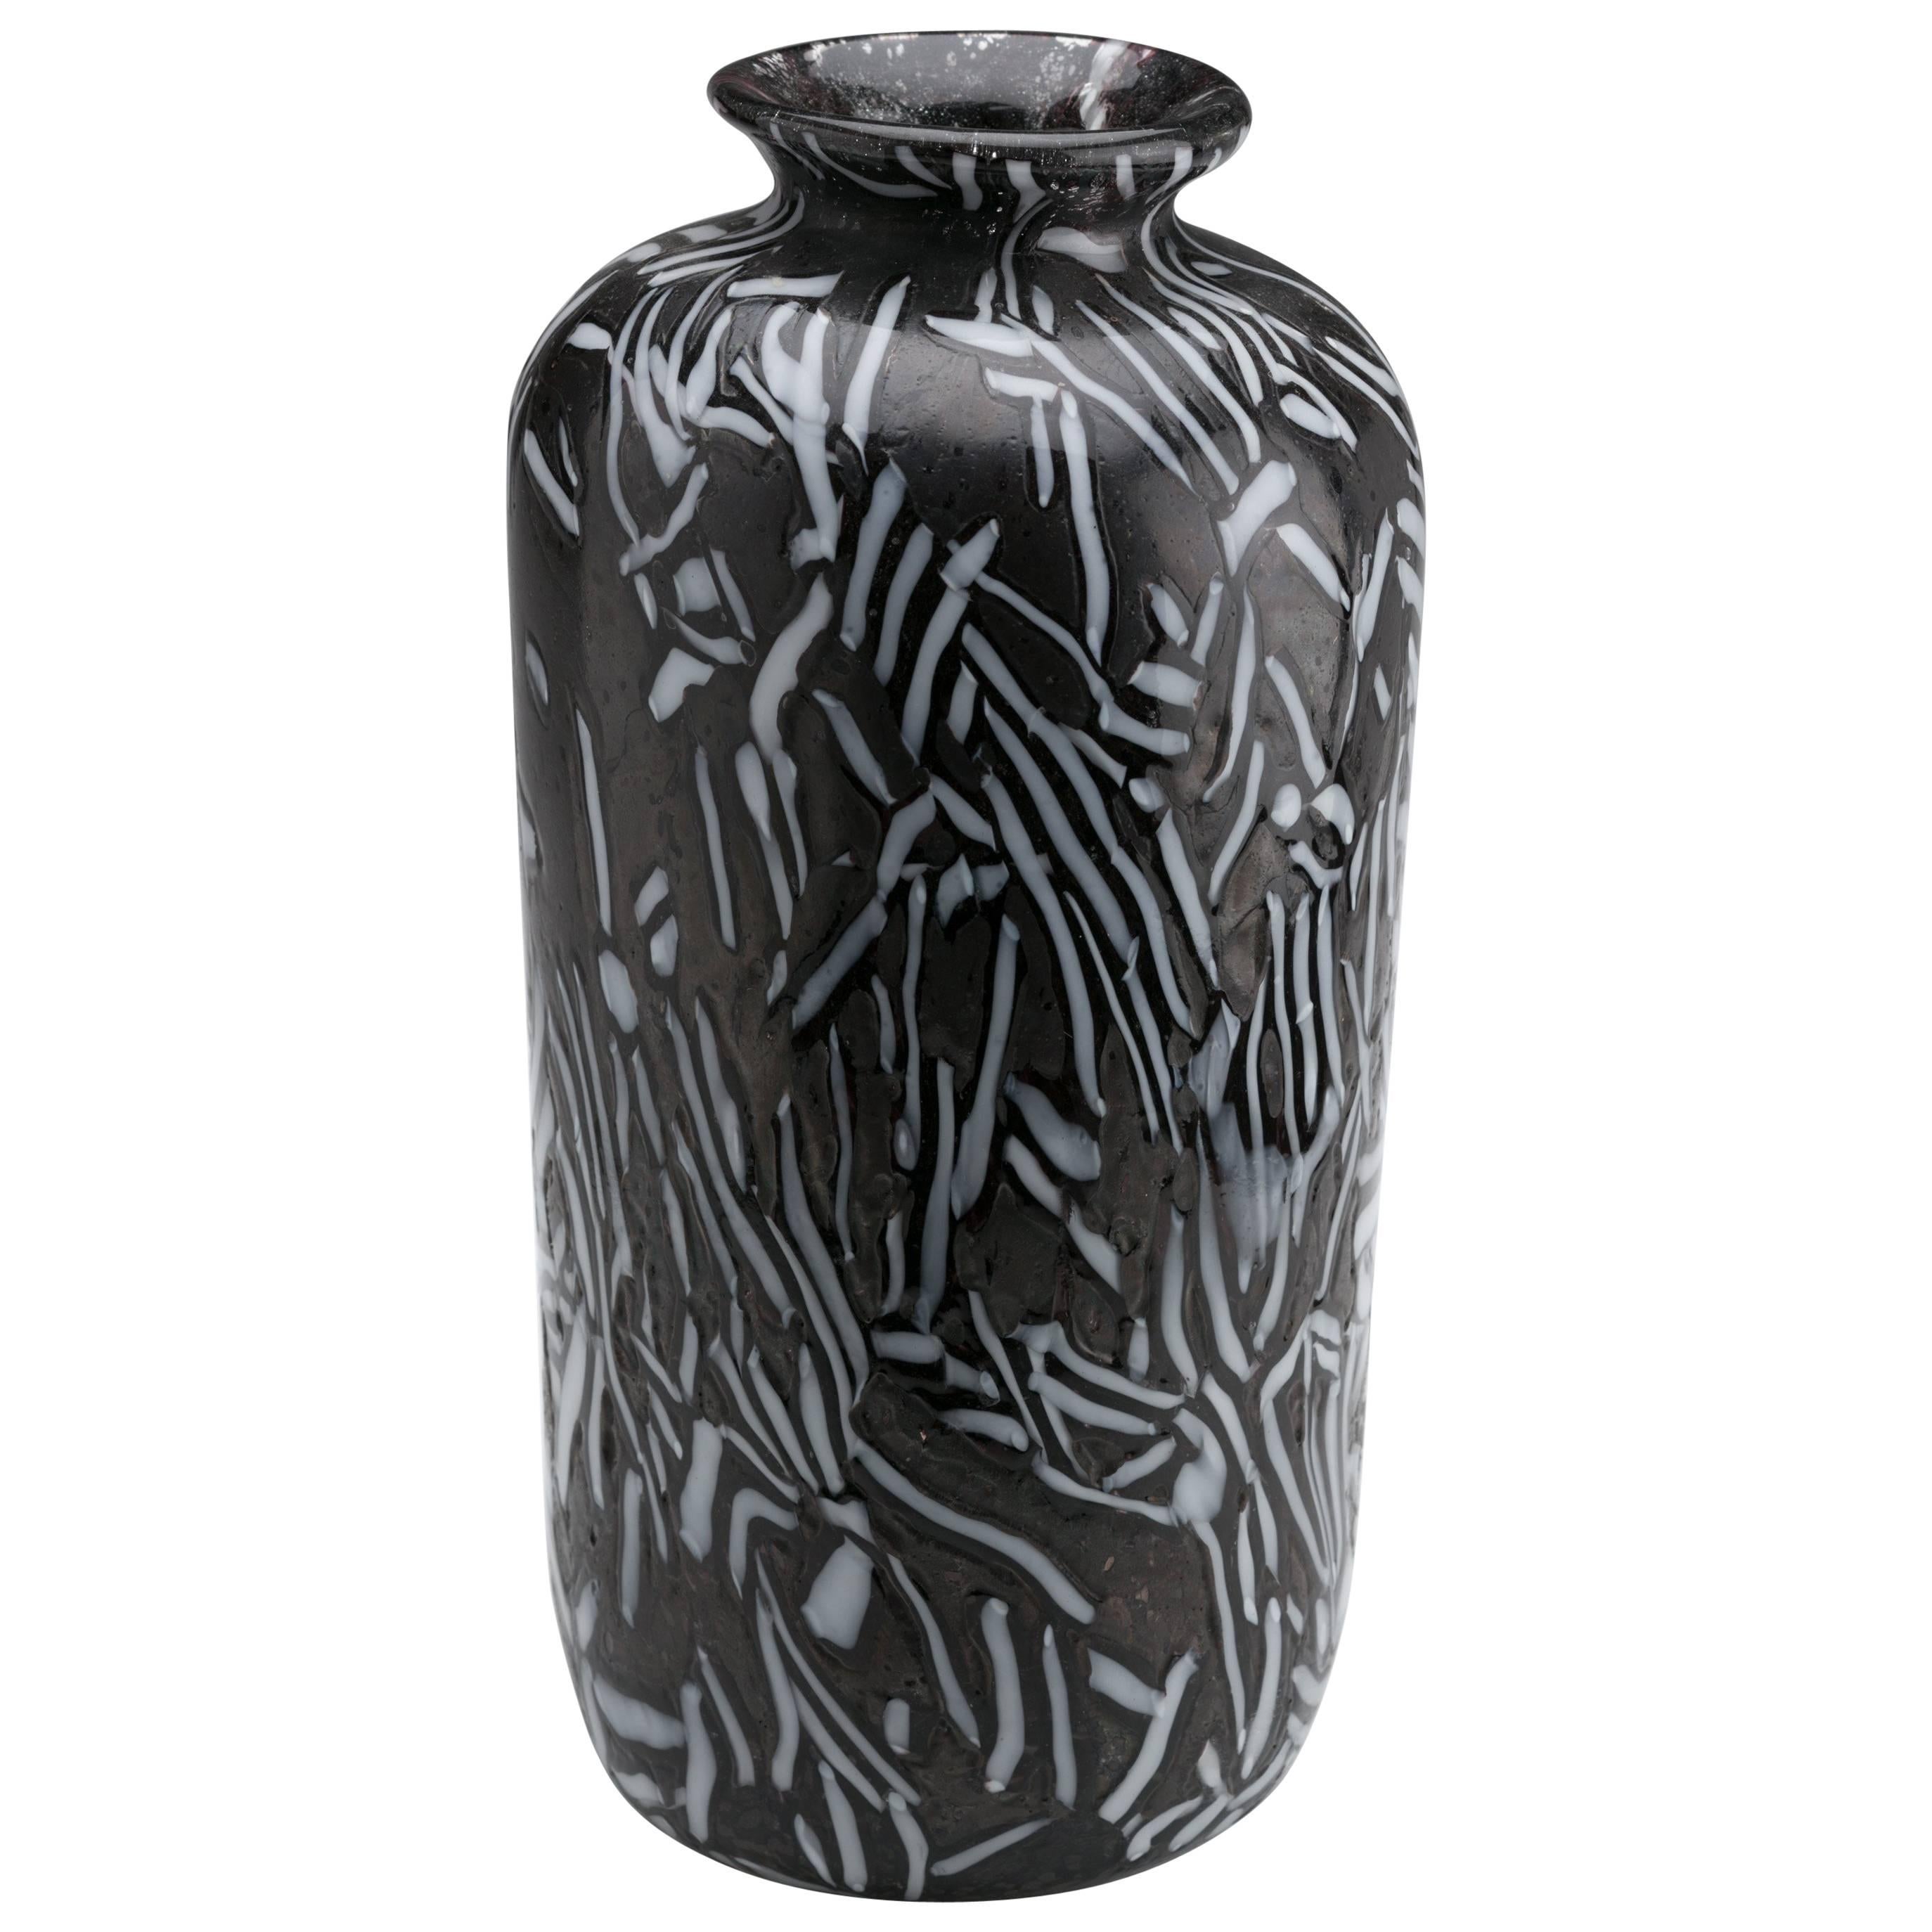 Nerox Vase by Fratelli Toso, Designed by Ermanno Toso in the Late 1950s For Sale